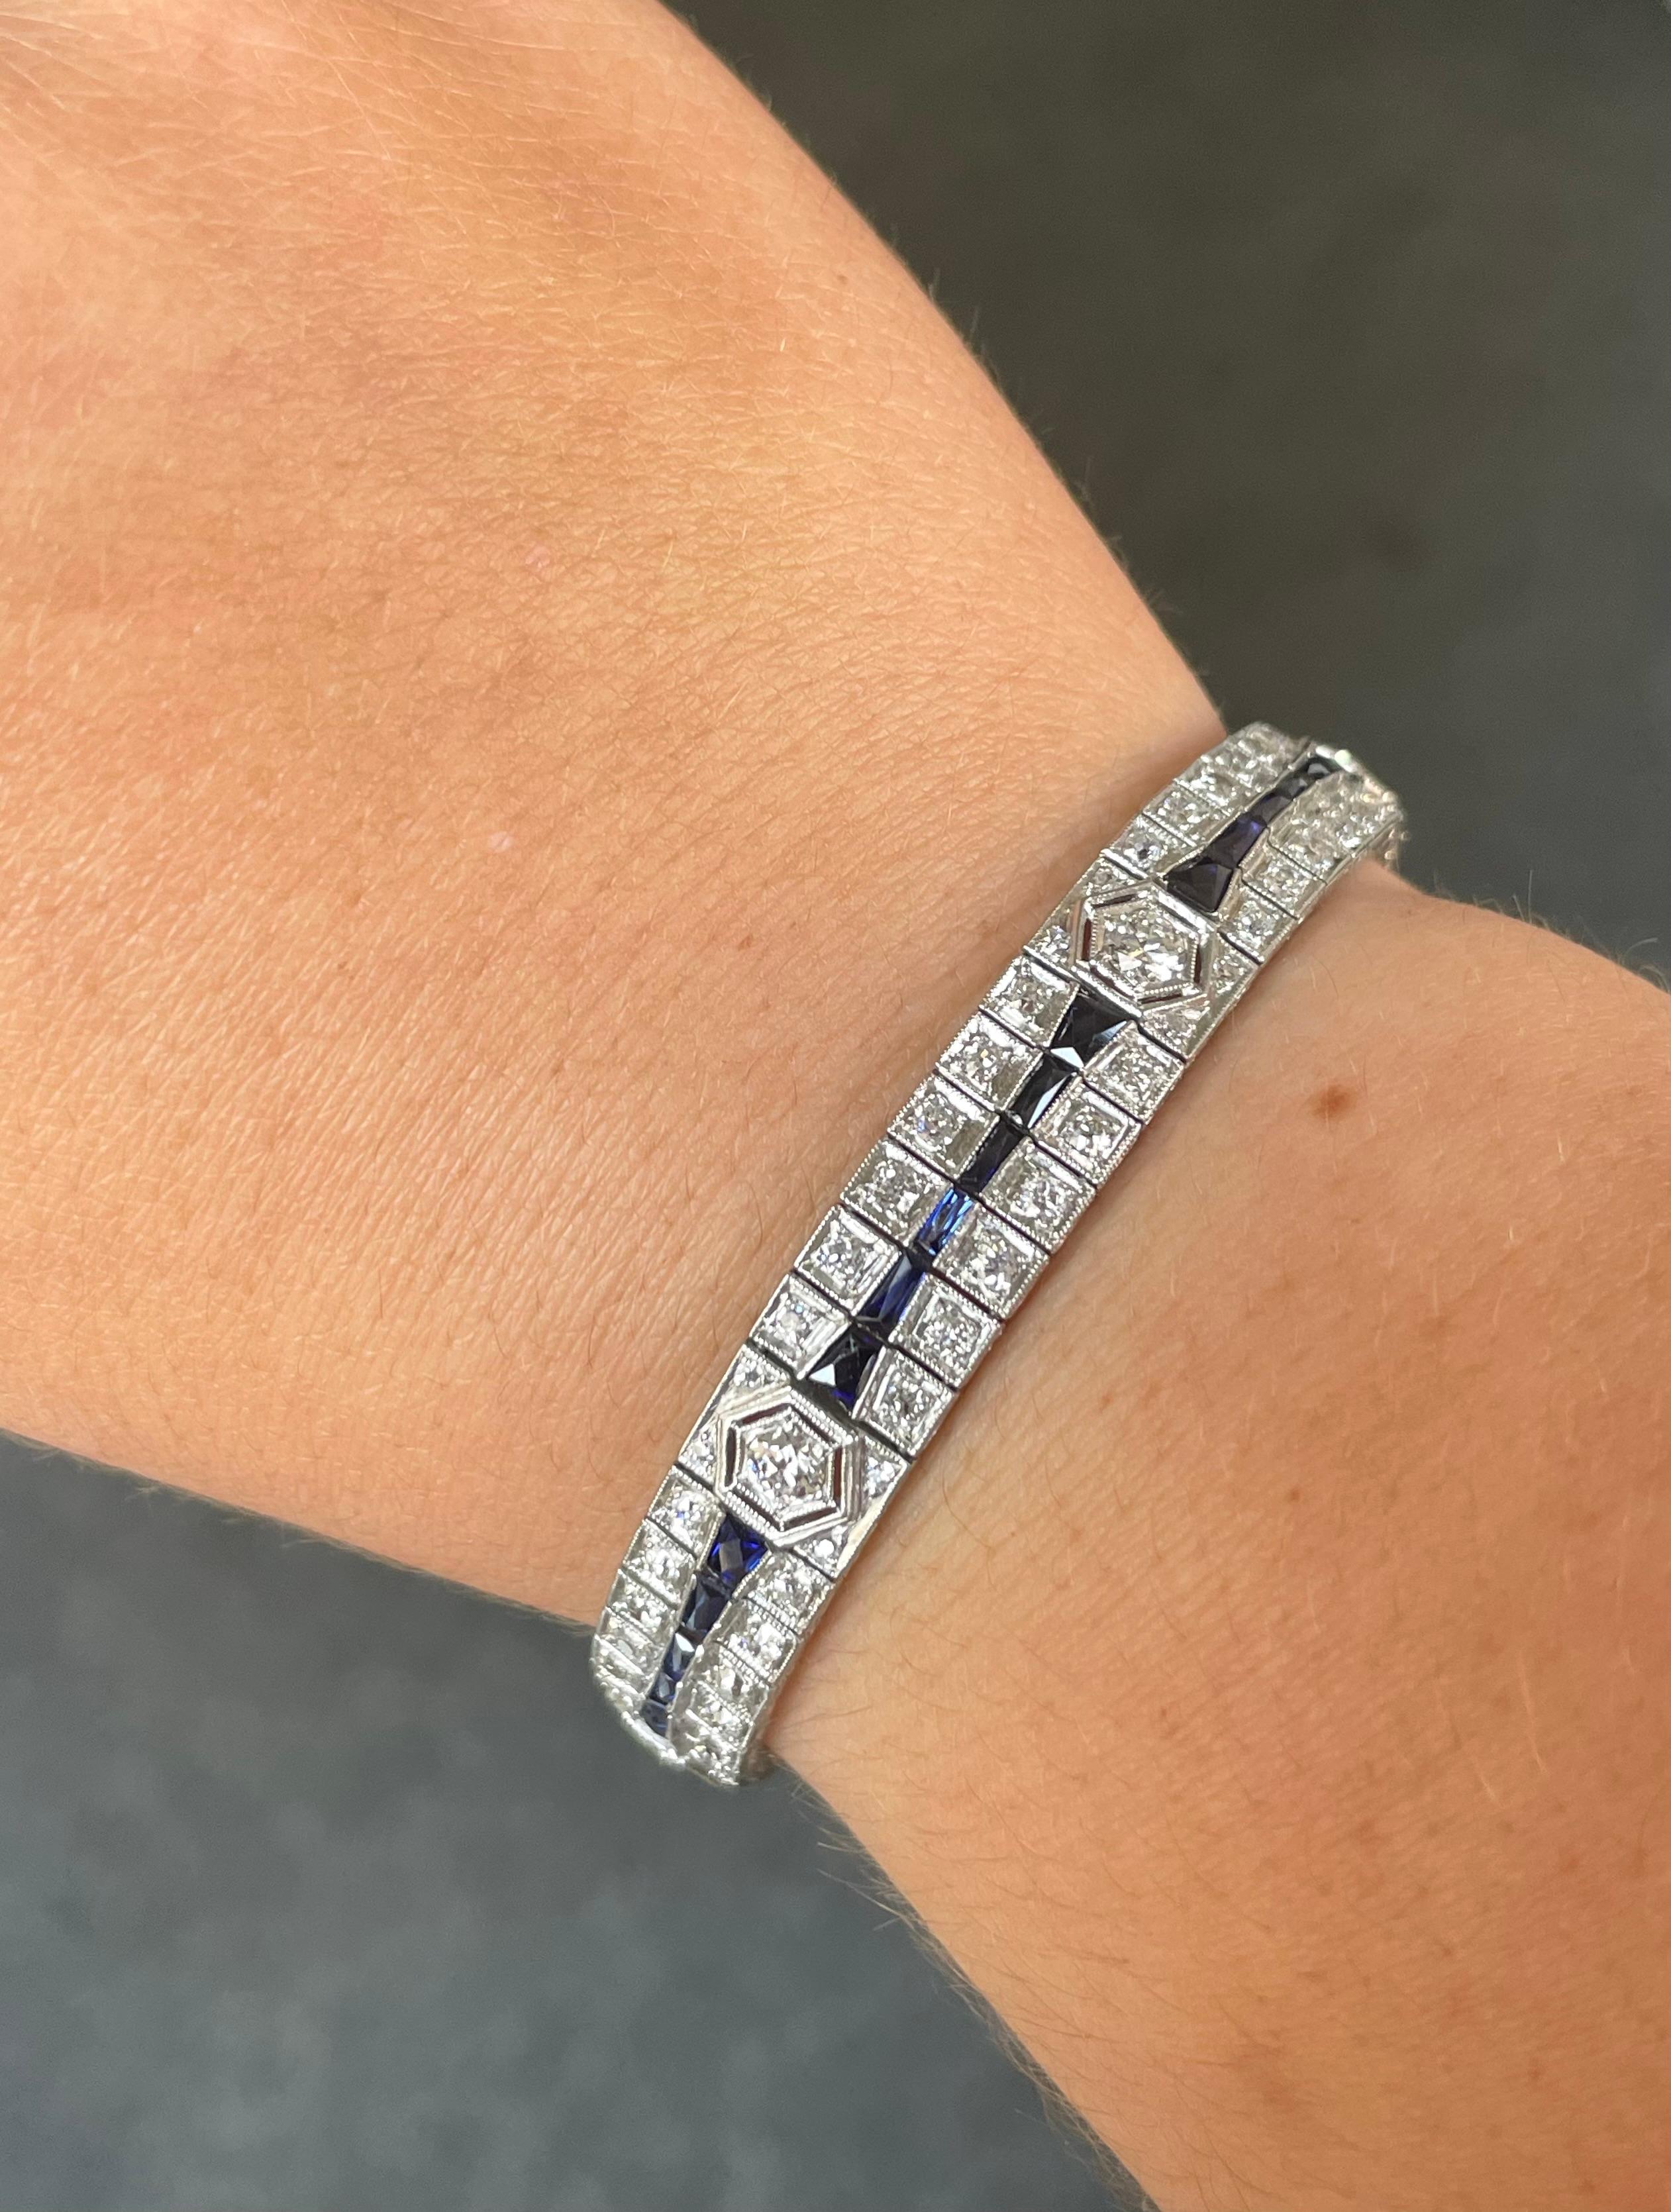 A truly one of a kind piece in exceptional condition, this beautiful Art Deco bracelet is an amazing example of the craftsmanship and detail of the period. 

The bracelet contains two rows of box-set 2mm round diamonds. Seven 3mm round diamonds set